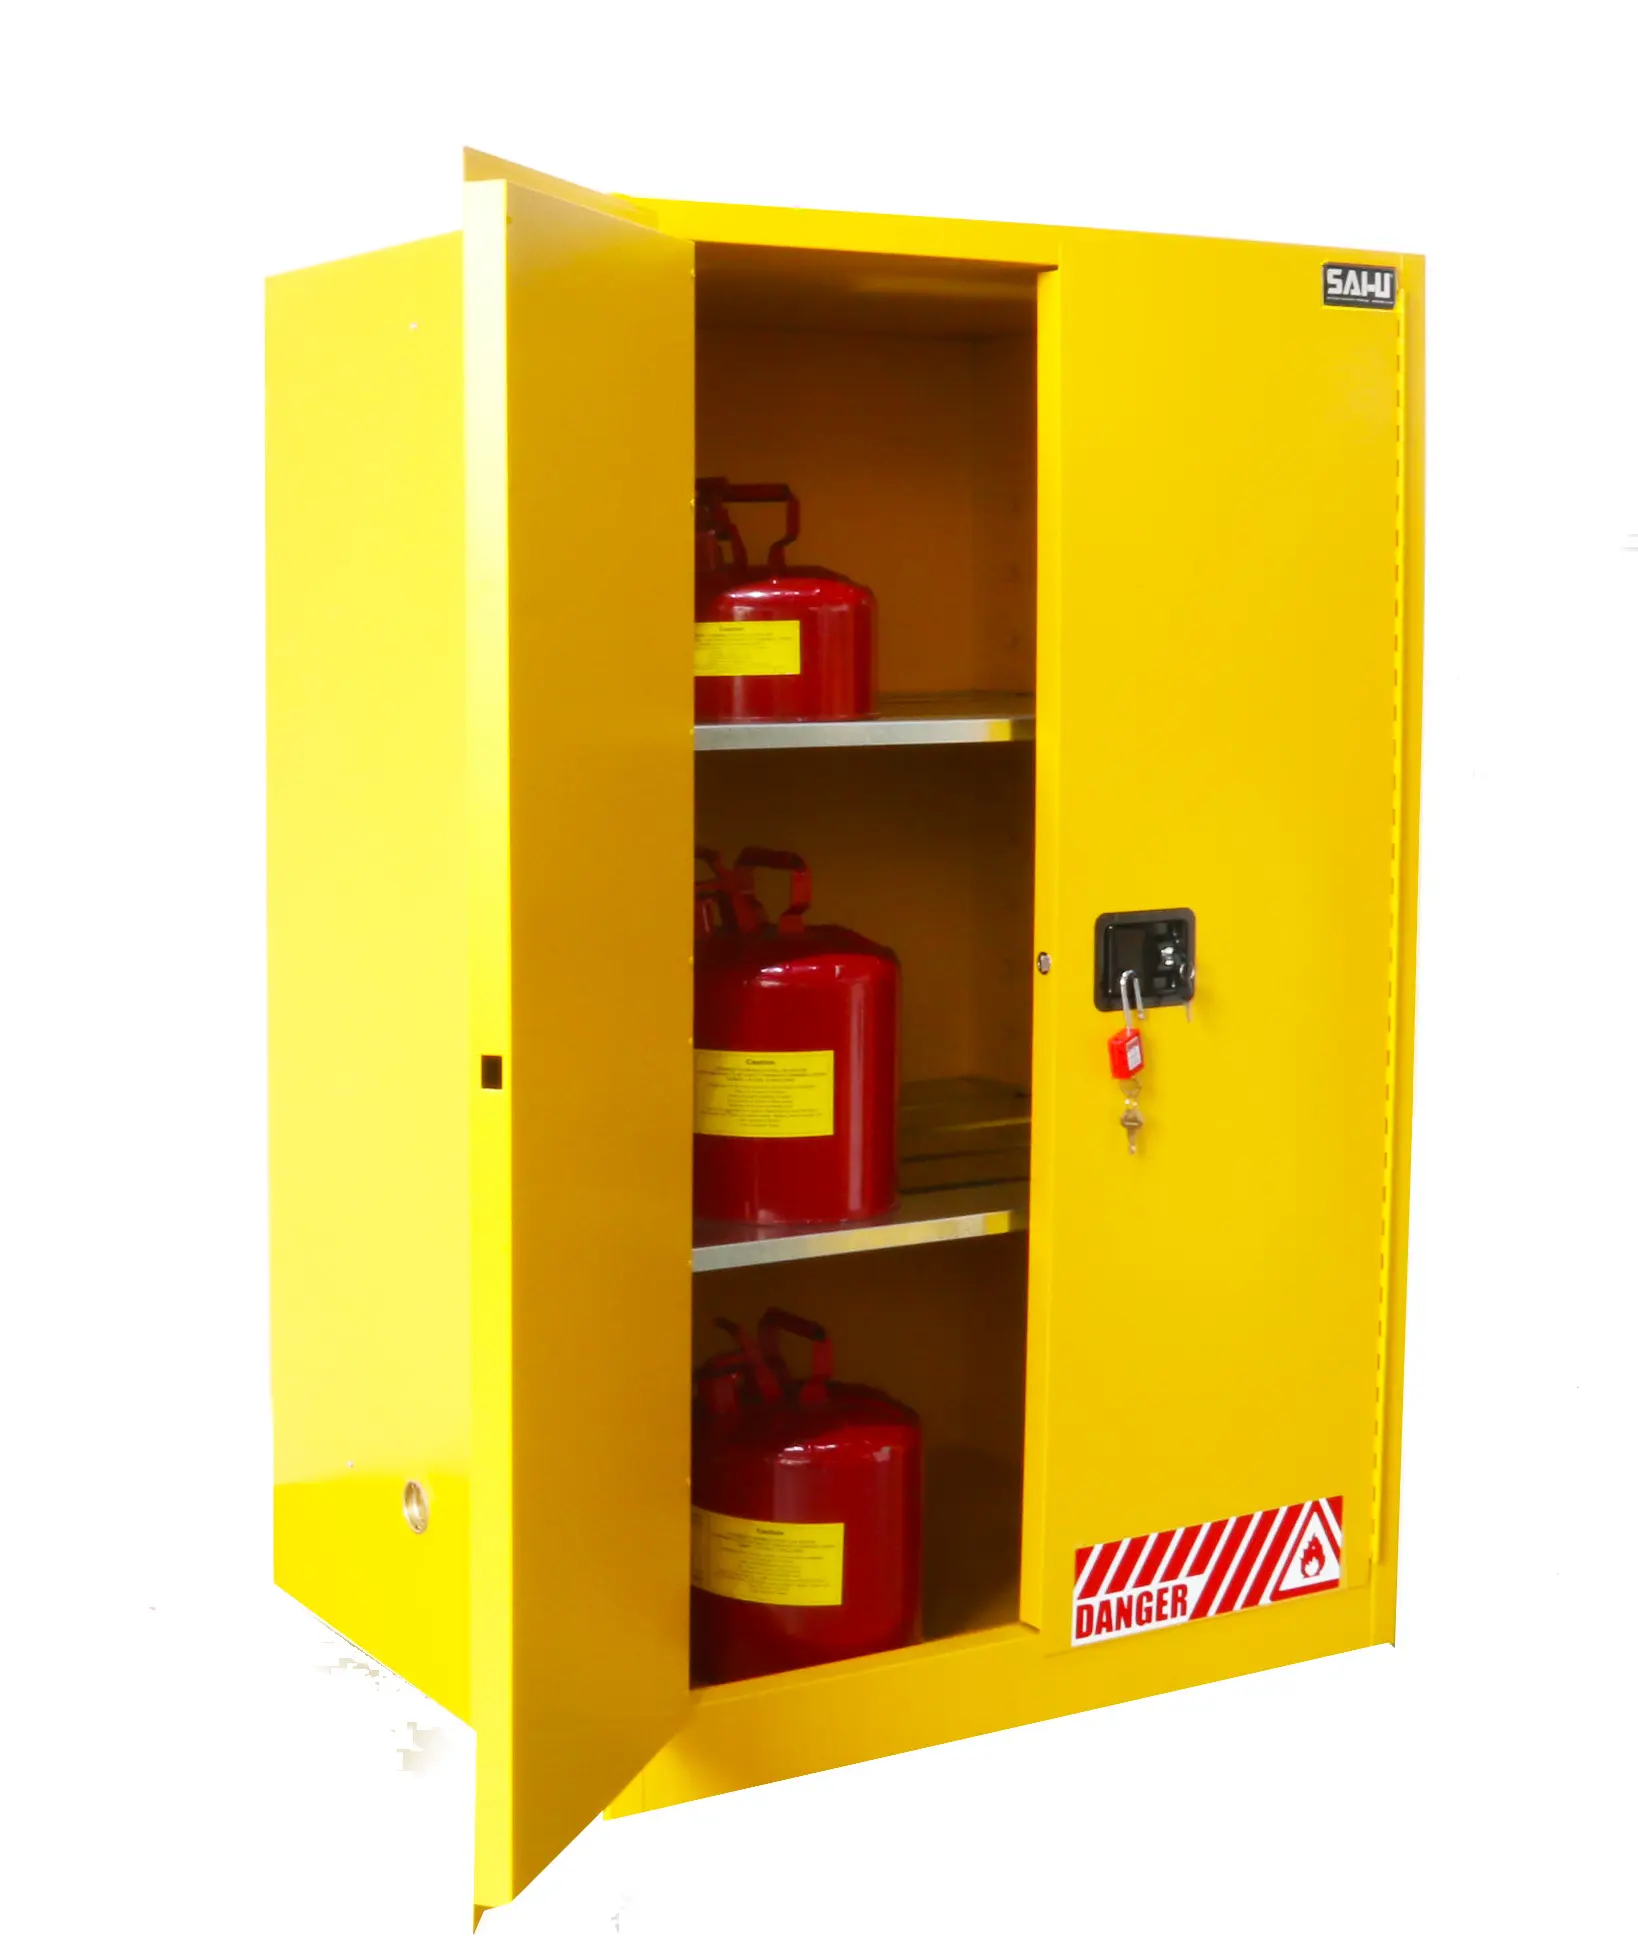 SAI-U Flammable Liquids Safety Cabinet 90 Gal with FM Approved